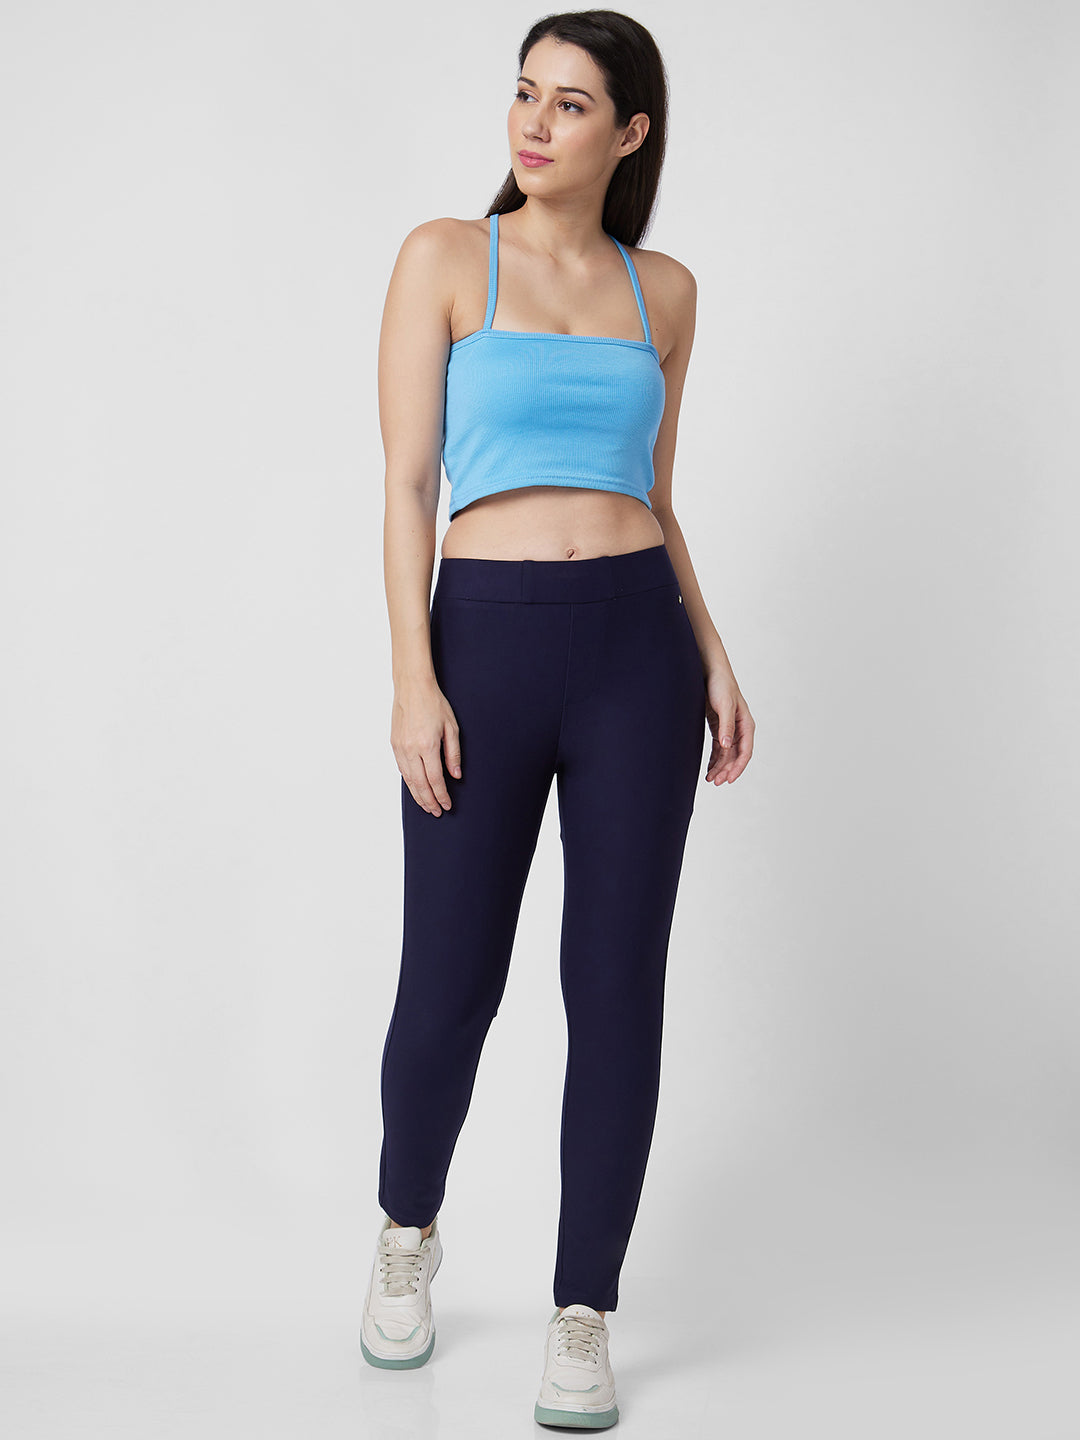 Spykar High Rise Skinny Fit Blue Knits Pant For Women